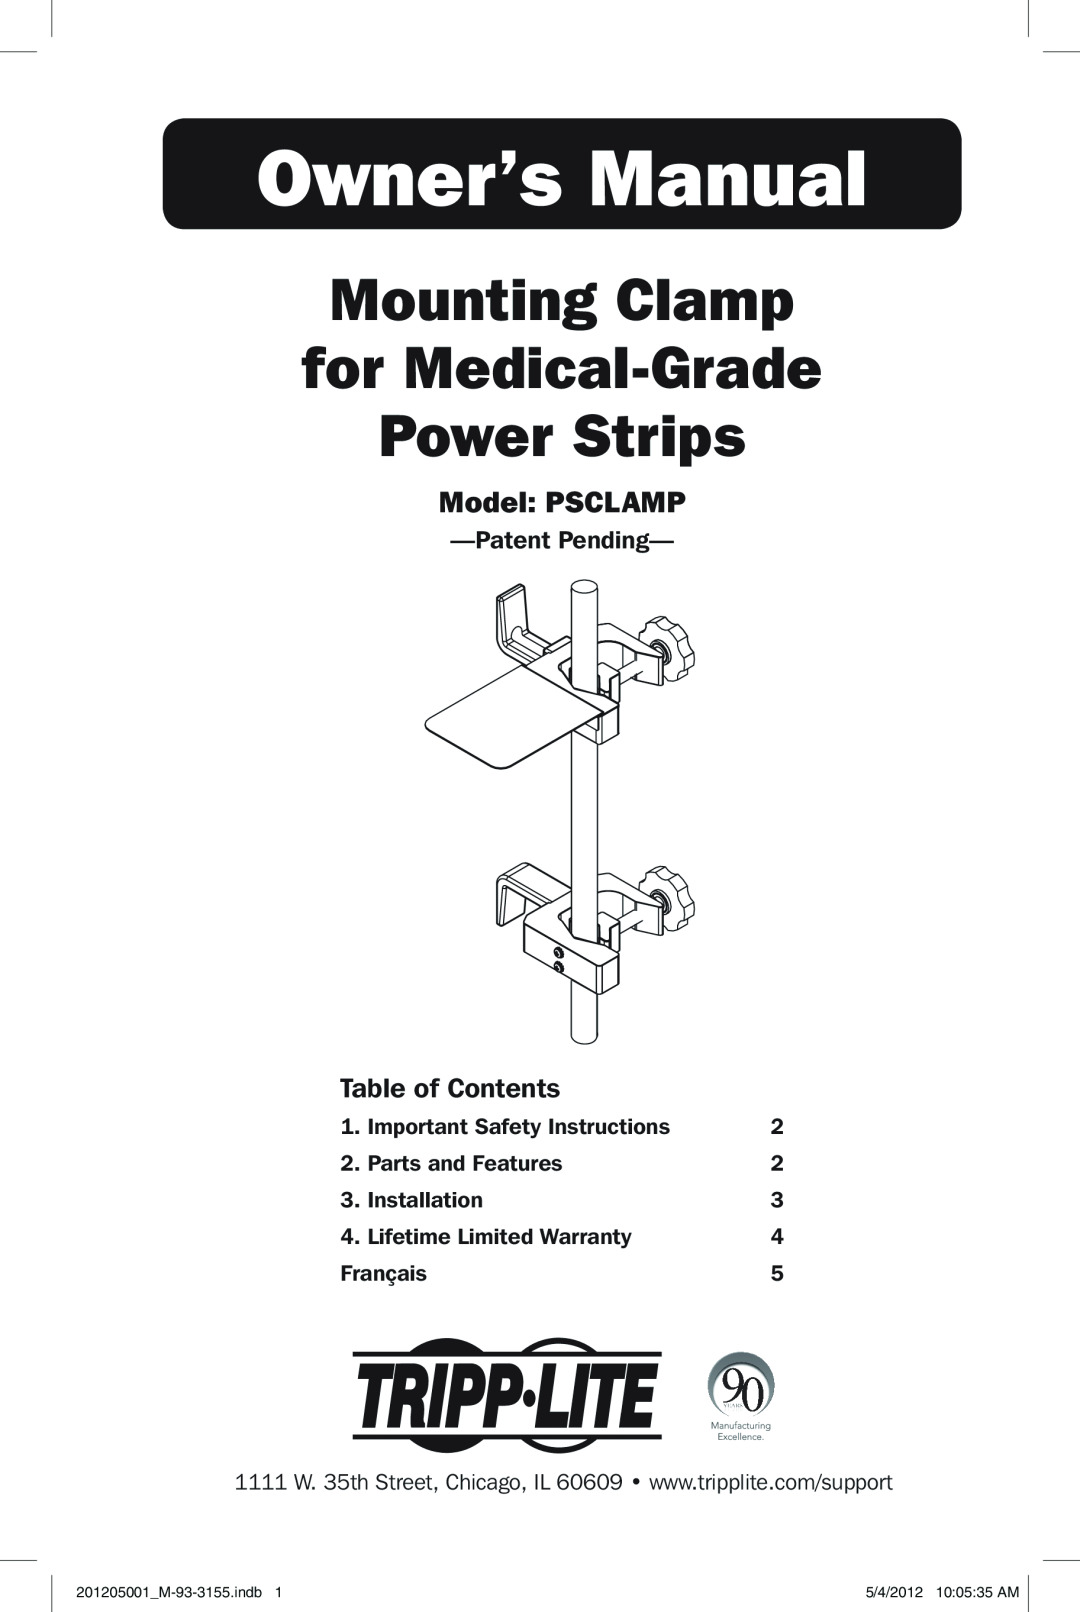 Tripp Lite owner manual Mounting Clamp for Medical-Grade Power Strips, Model PSCLAMP, Table of Contents, Patent Pending 